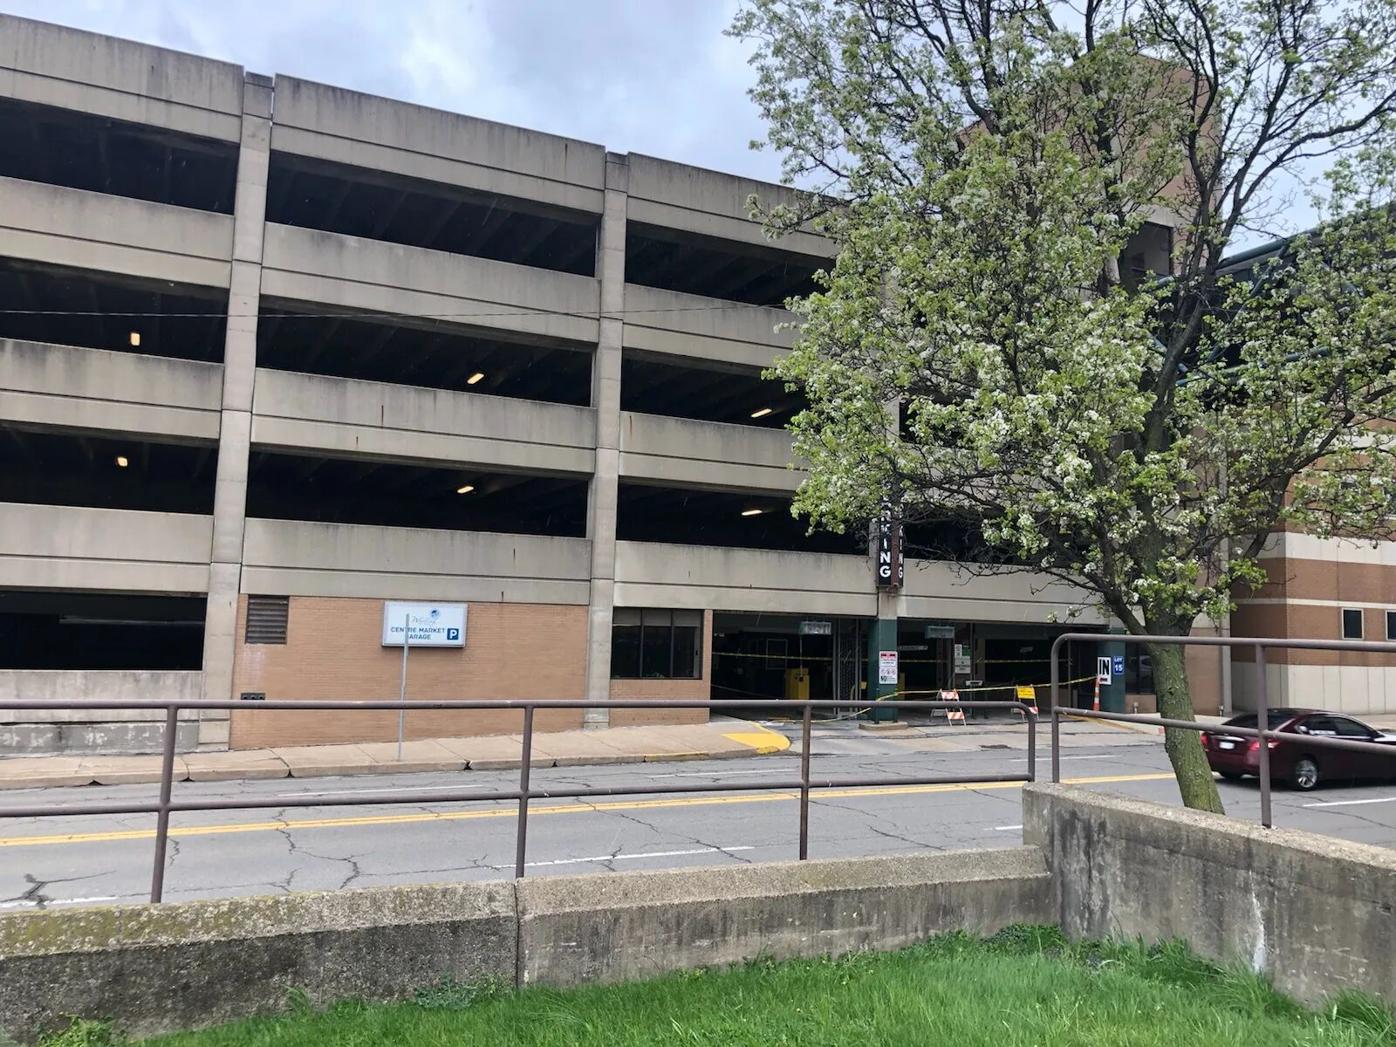 Parking garage shut down after nearby construction caused damage in  Wheeling, West Virginia | WV News 